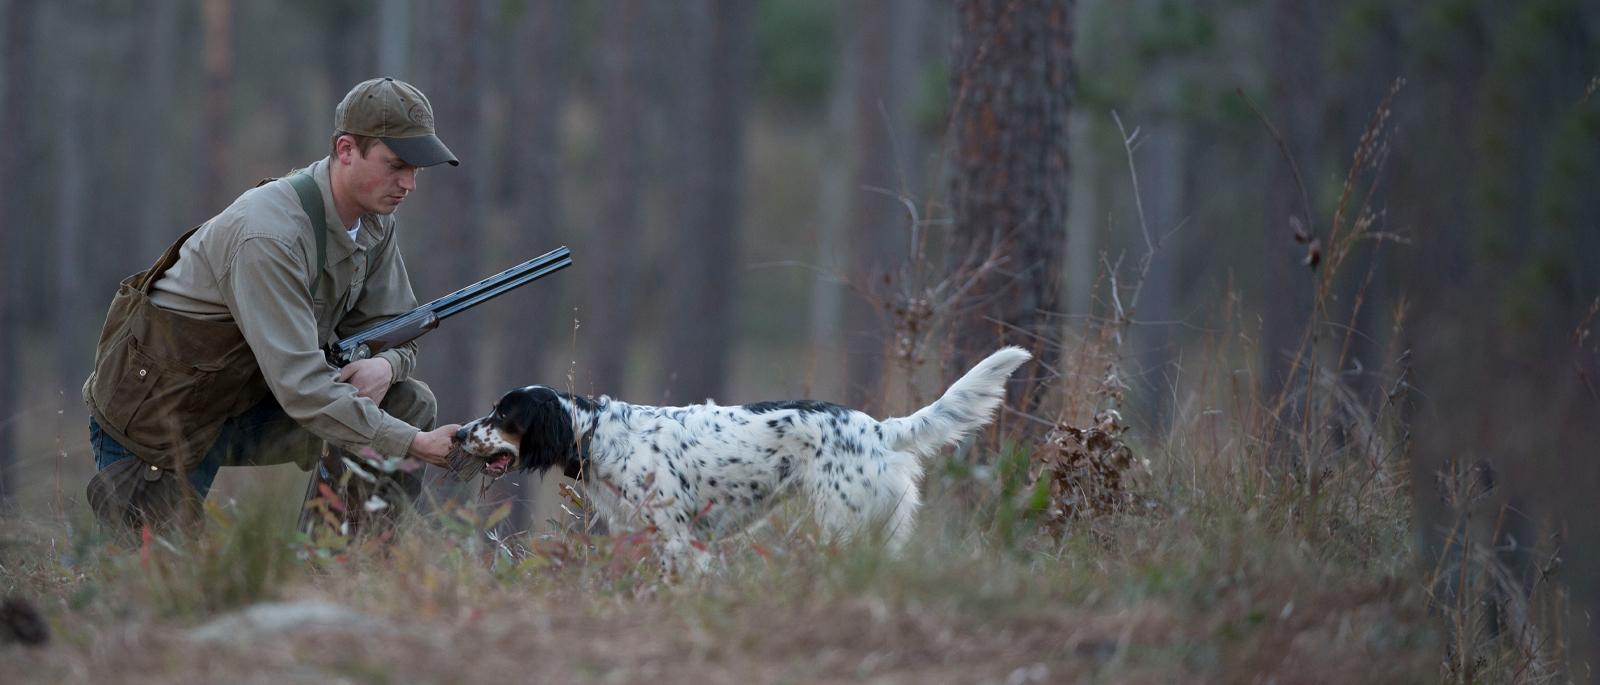 Hunter and hunting dog in woods